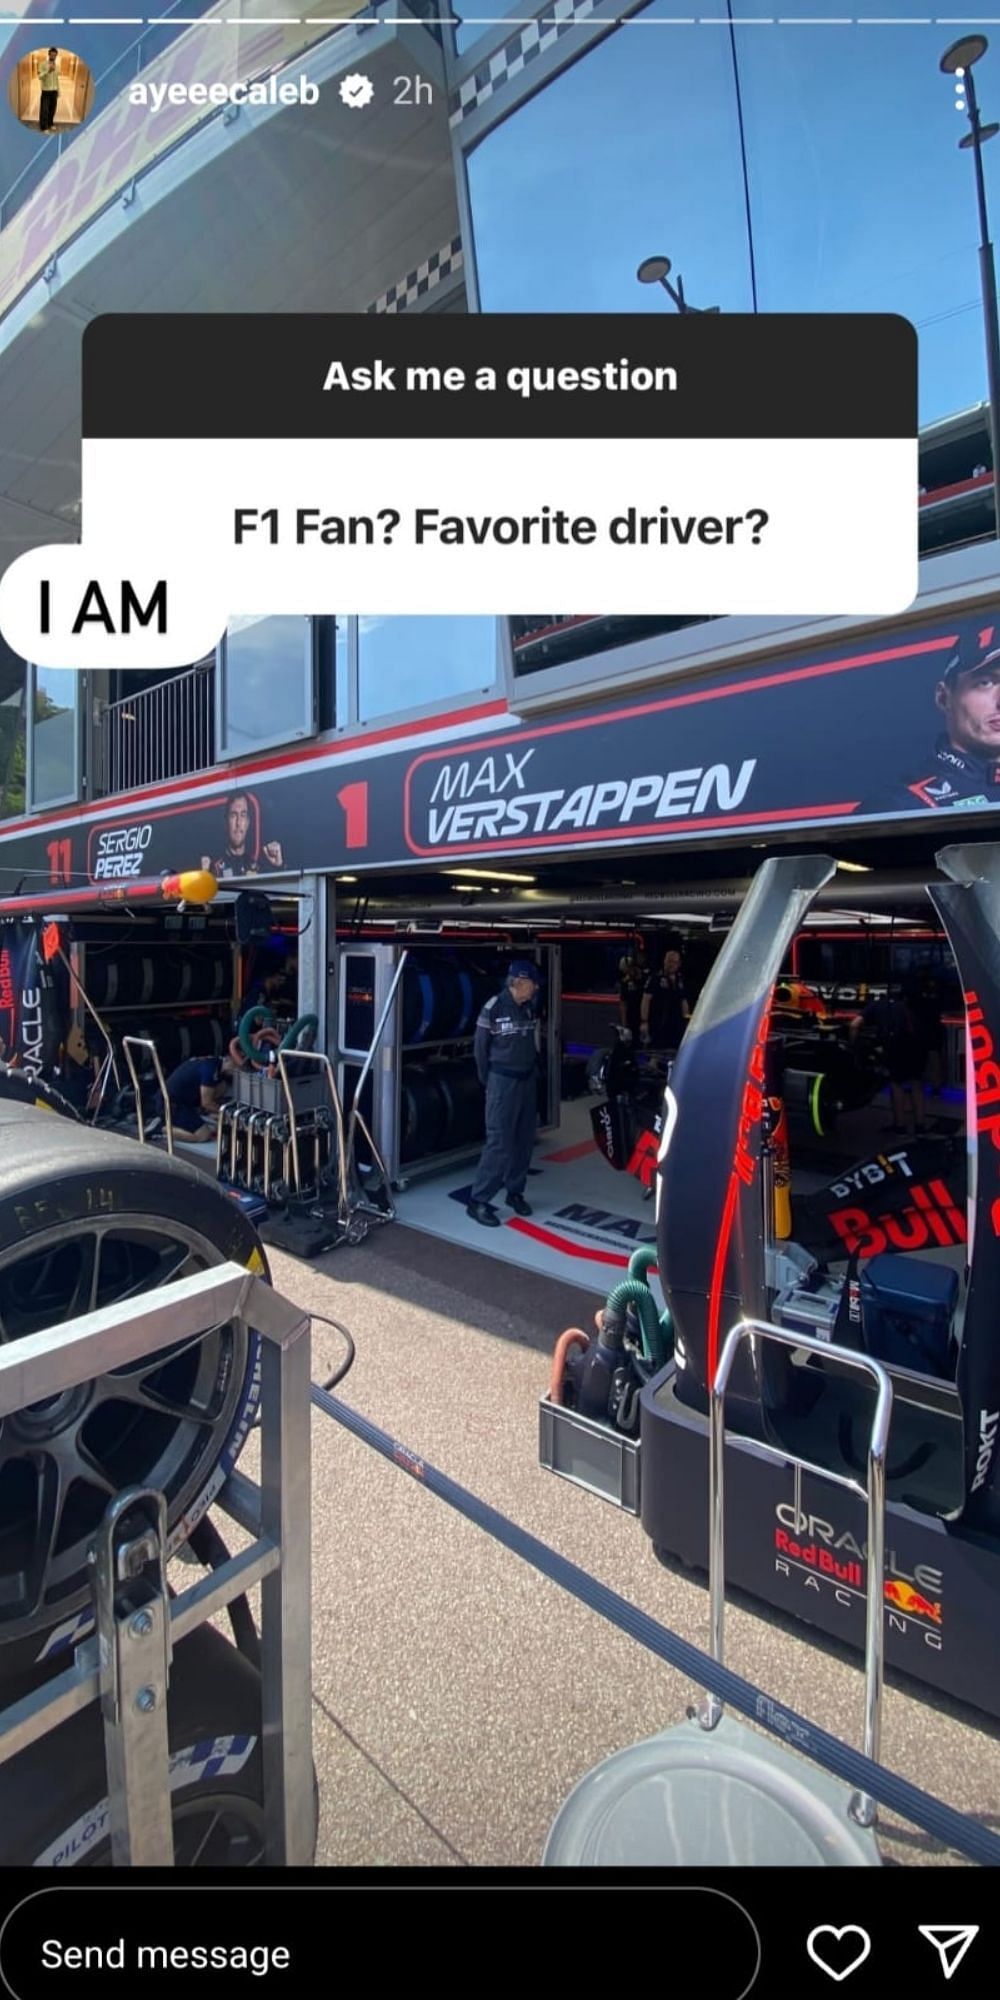 Williams chose Max Verstappen as his favorite F1 driver.